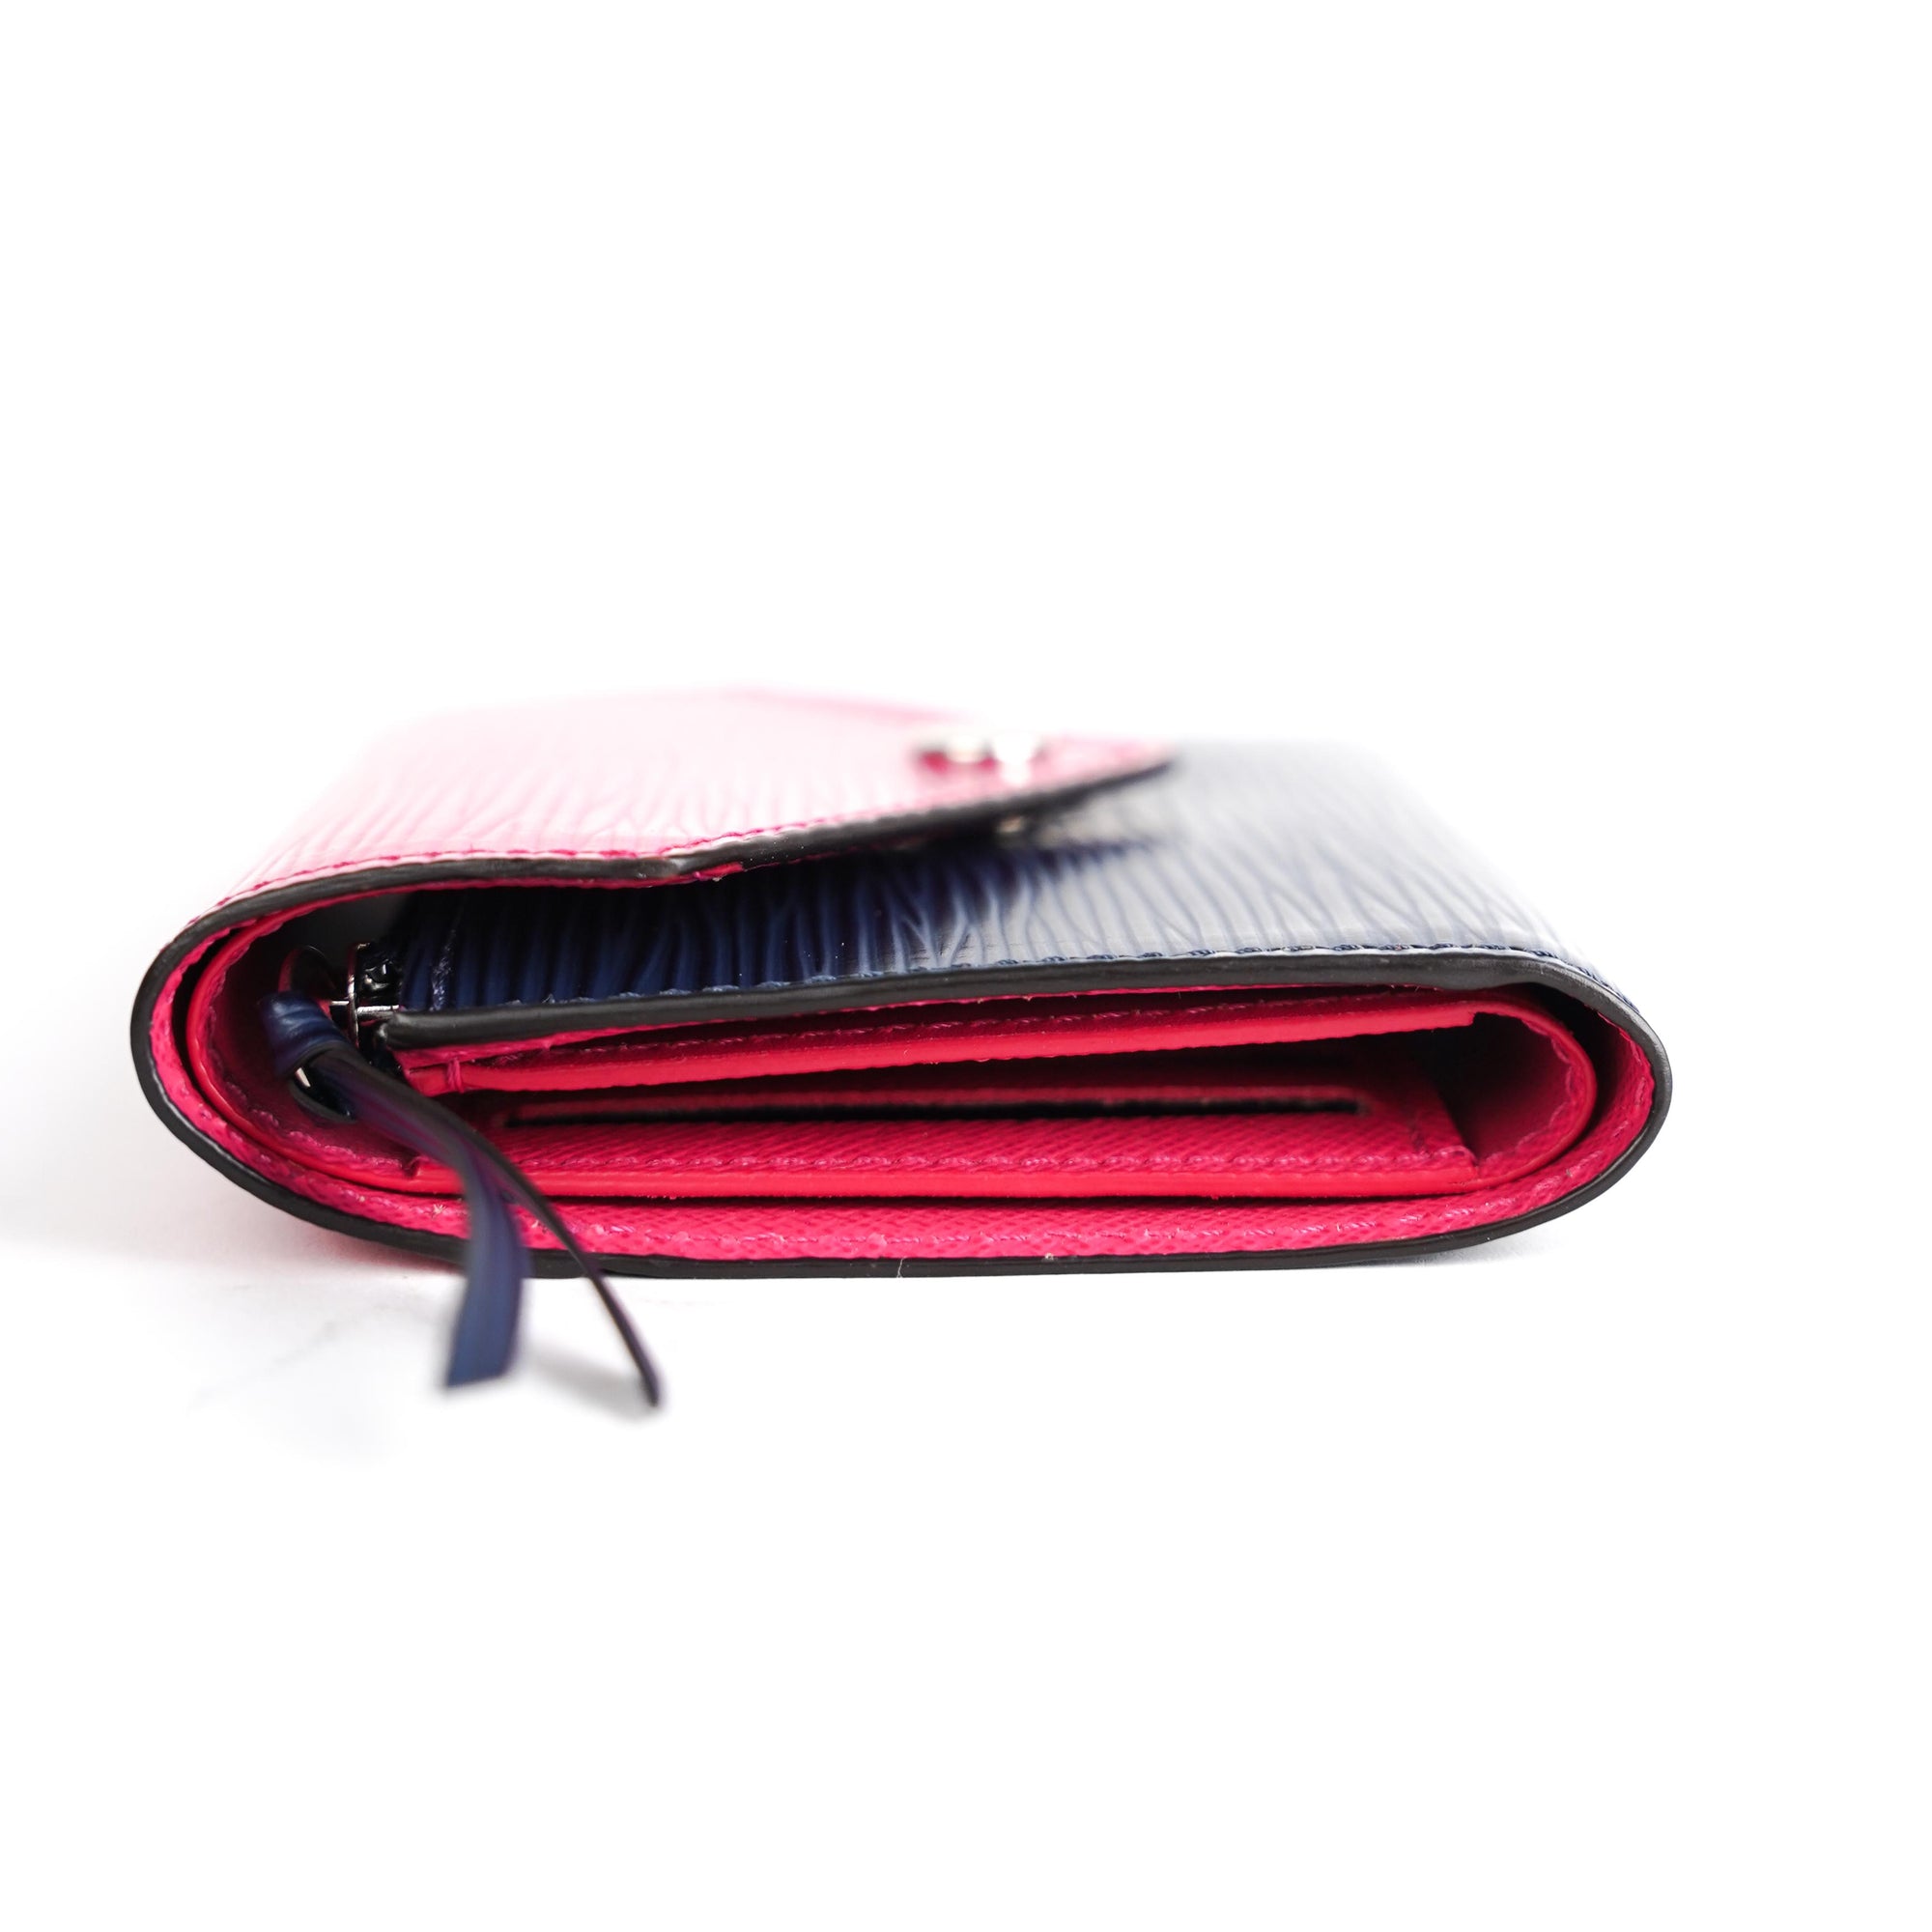 Cloth wallet Louis Vuitton Pink in Cloth - 31223343